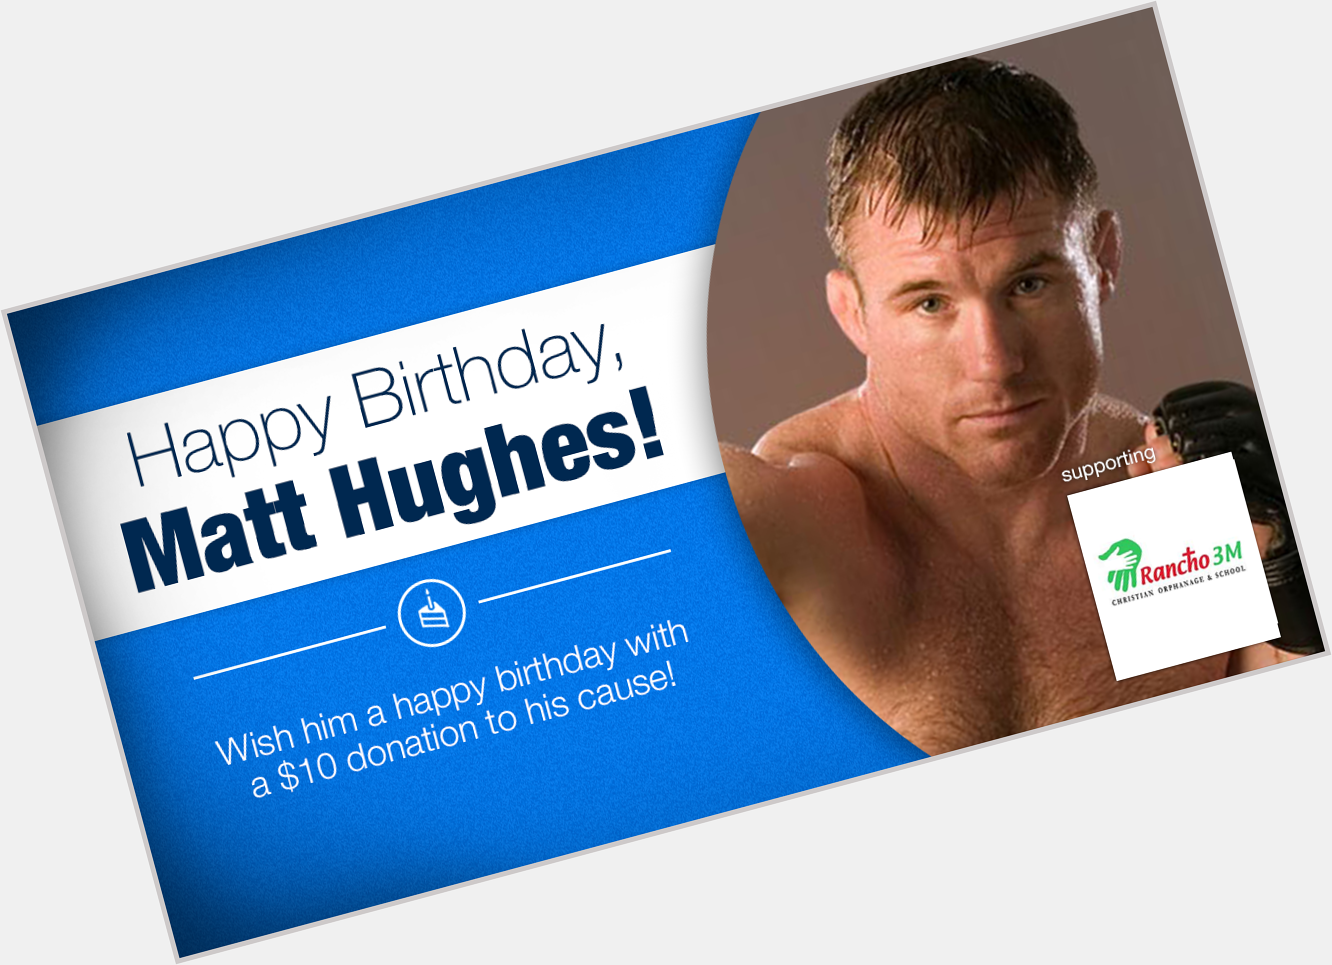 Happy Birthday Wish him a happy birthday with a donation to his cause!  